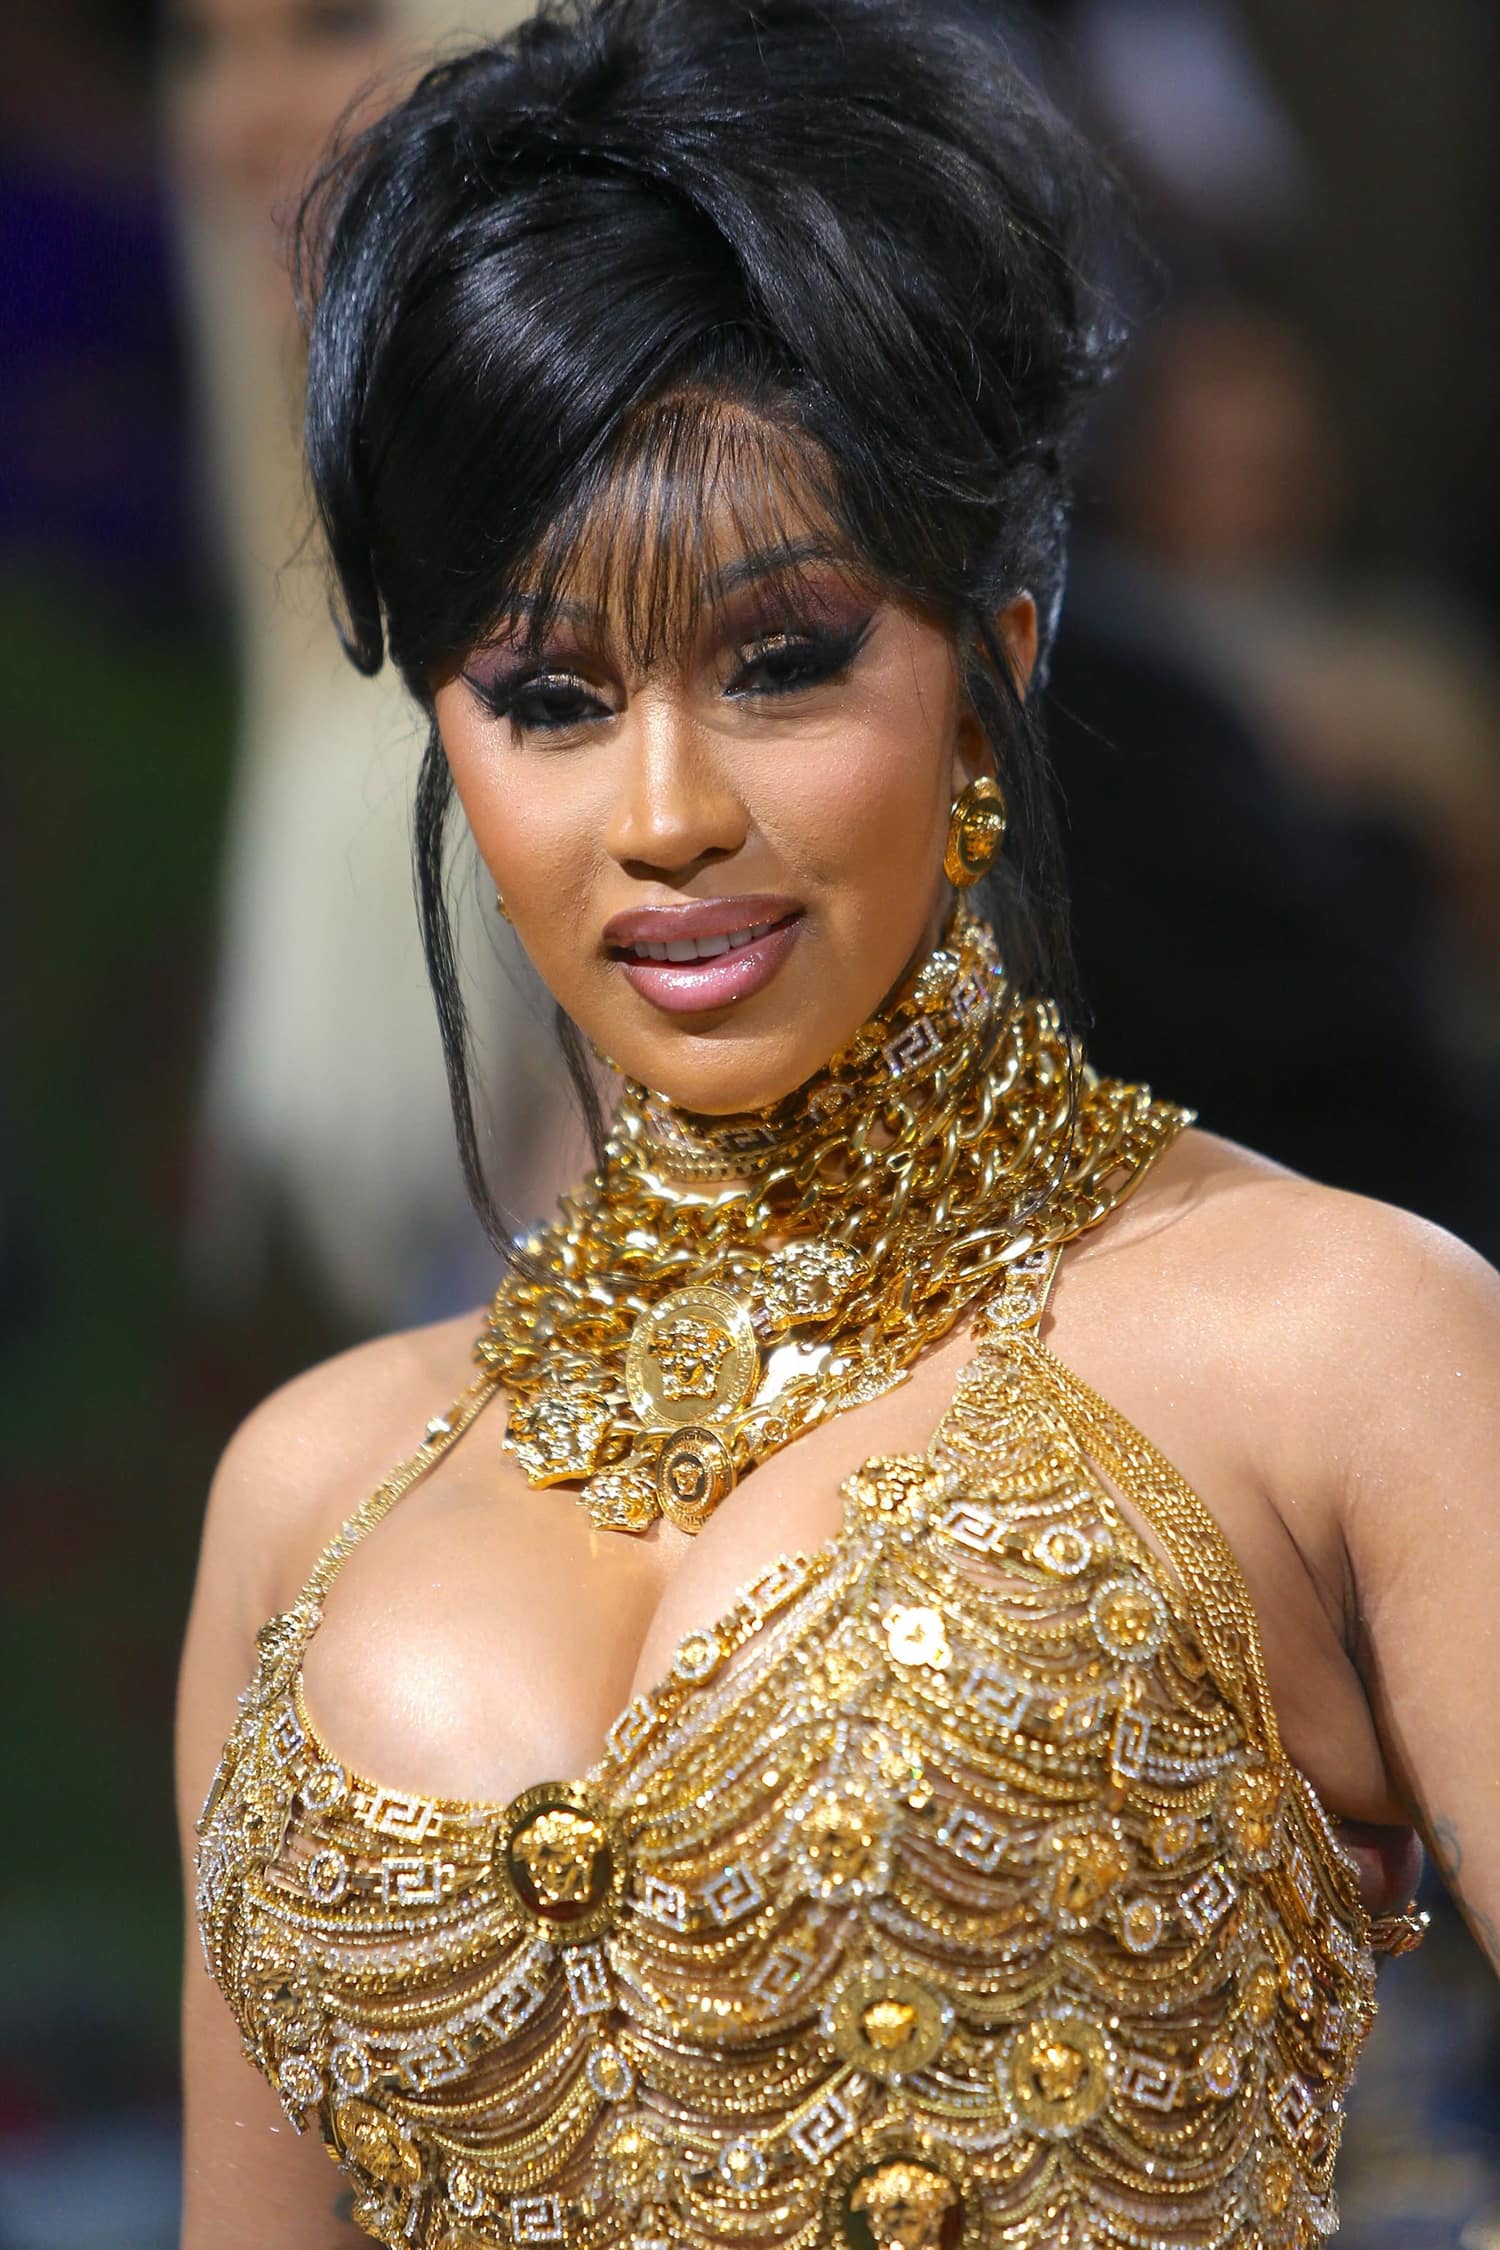 Cardi B wore a Versace dress embroidered with gold chains that took 20 craftsmen 1,300 hours to complete